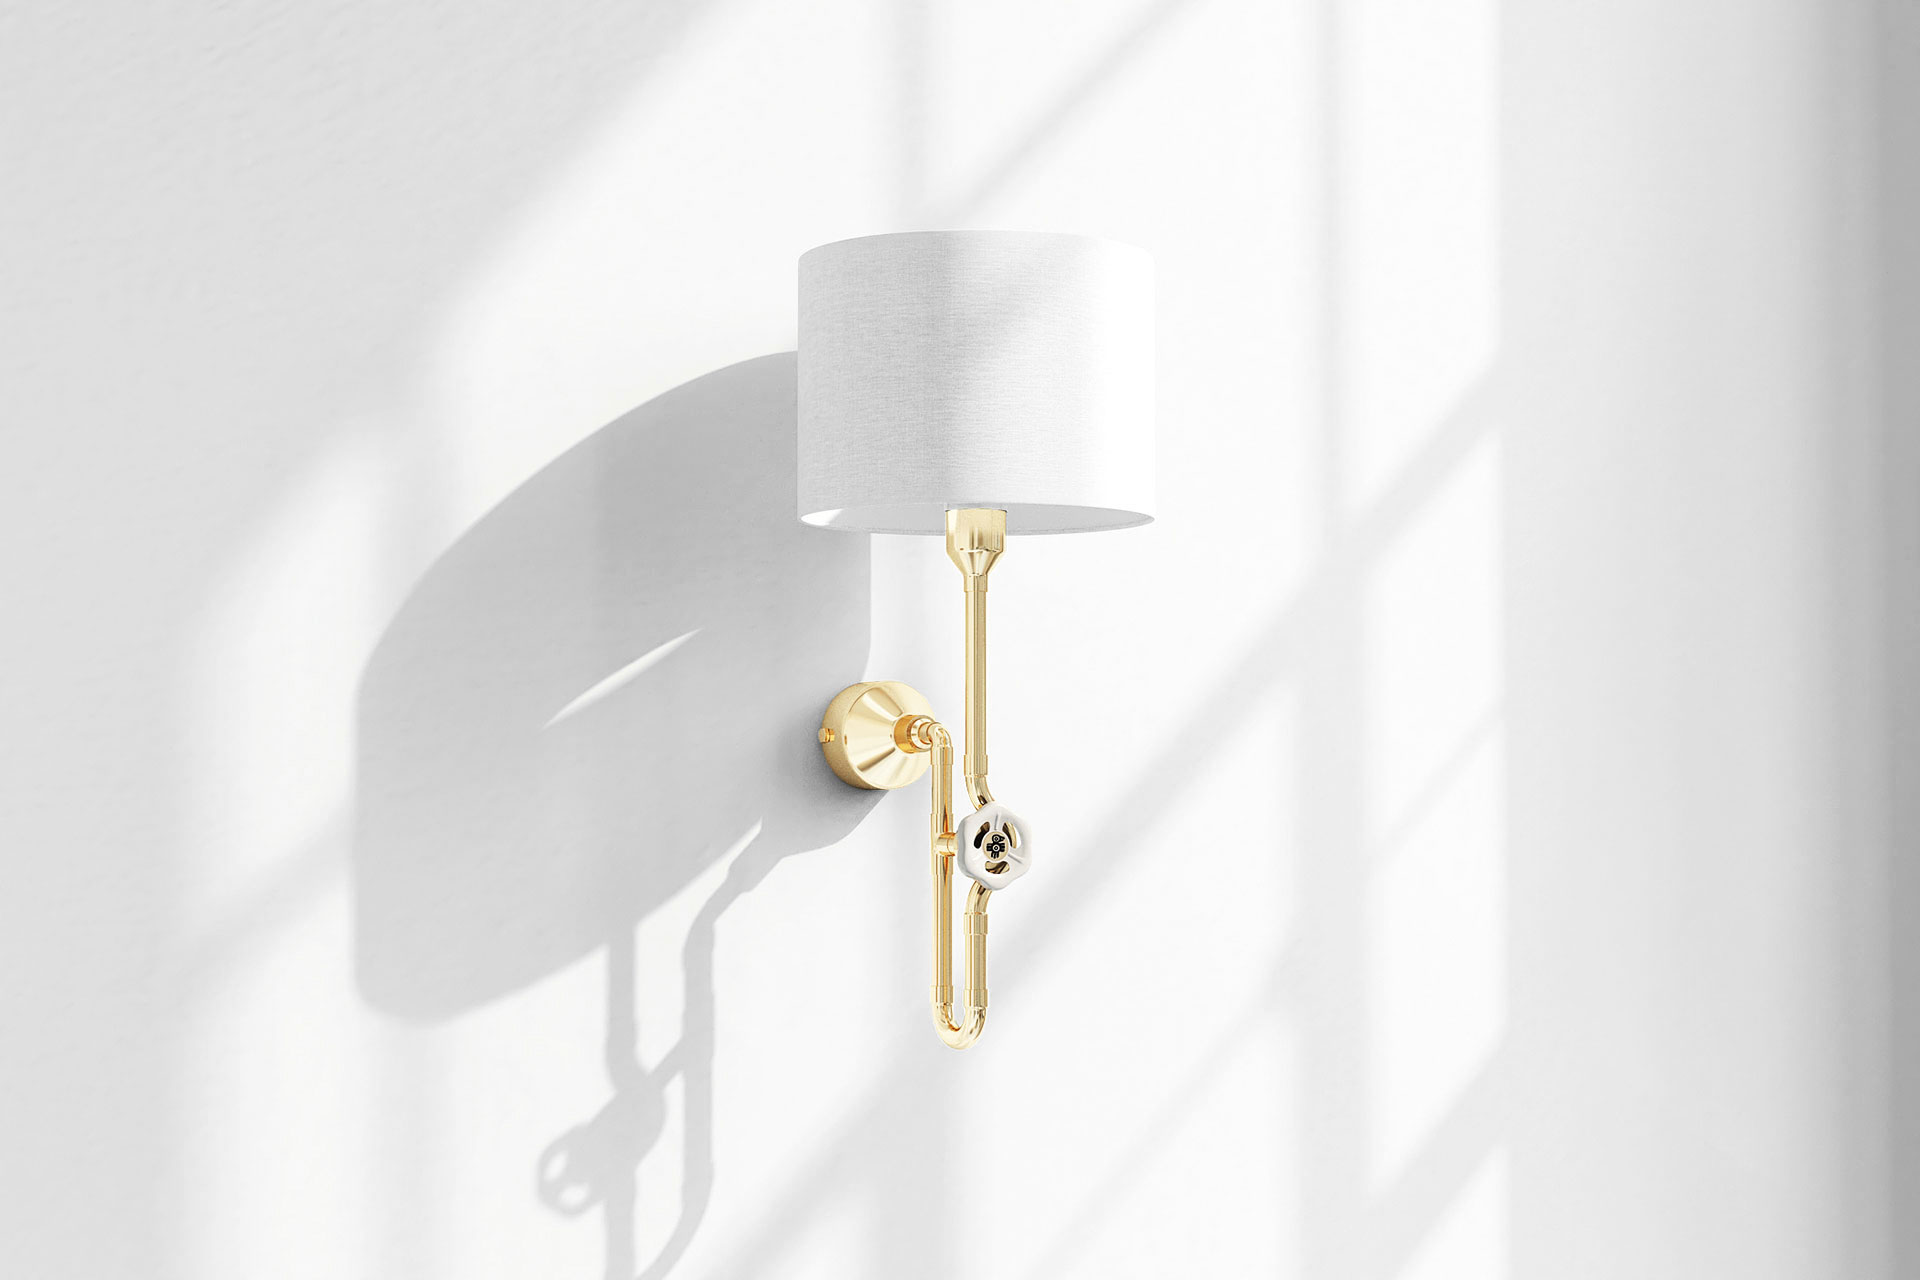 Contemporary wall lamp in trendy brass metal finish with vintage ivory knob and white linen shade in light bedroom